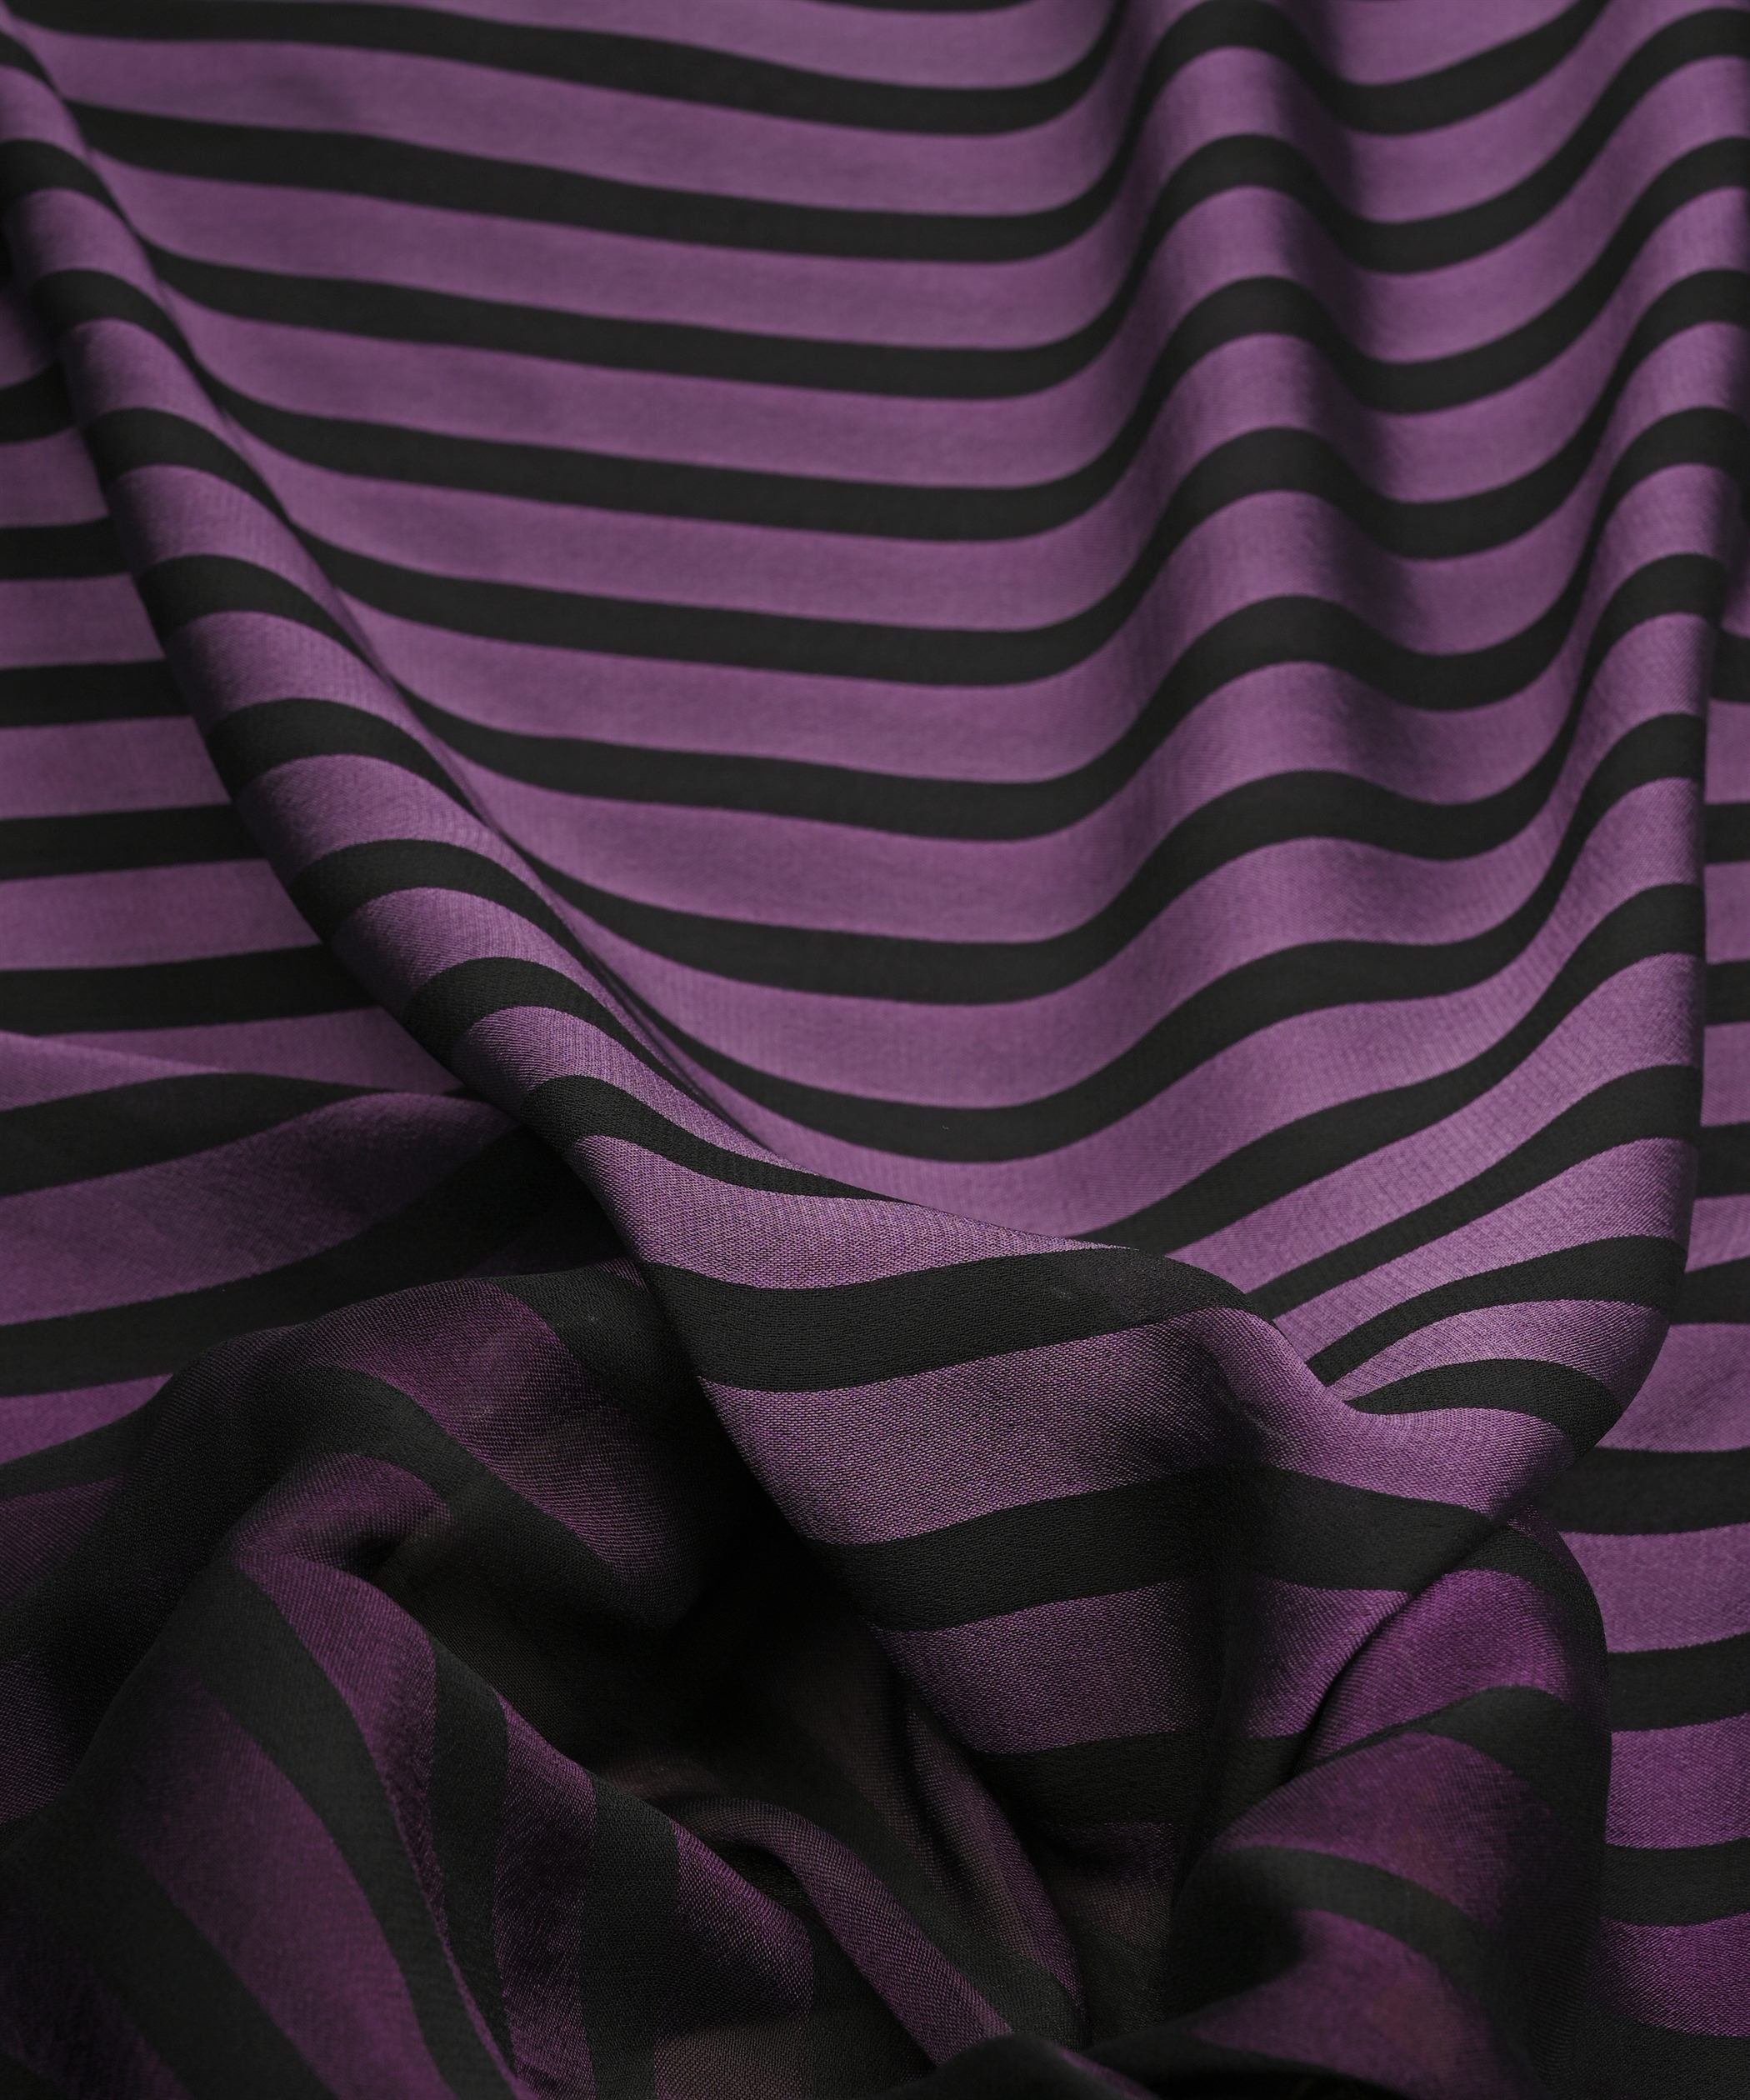 SHADED-CHIFFON-WITH-STRIPES-VOILET-FEEL0.jpg